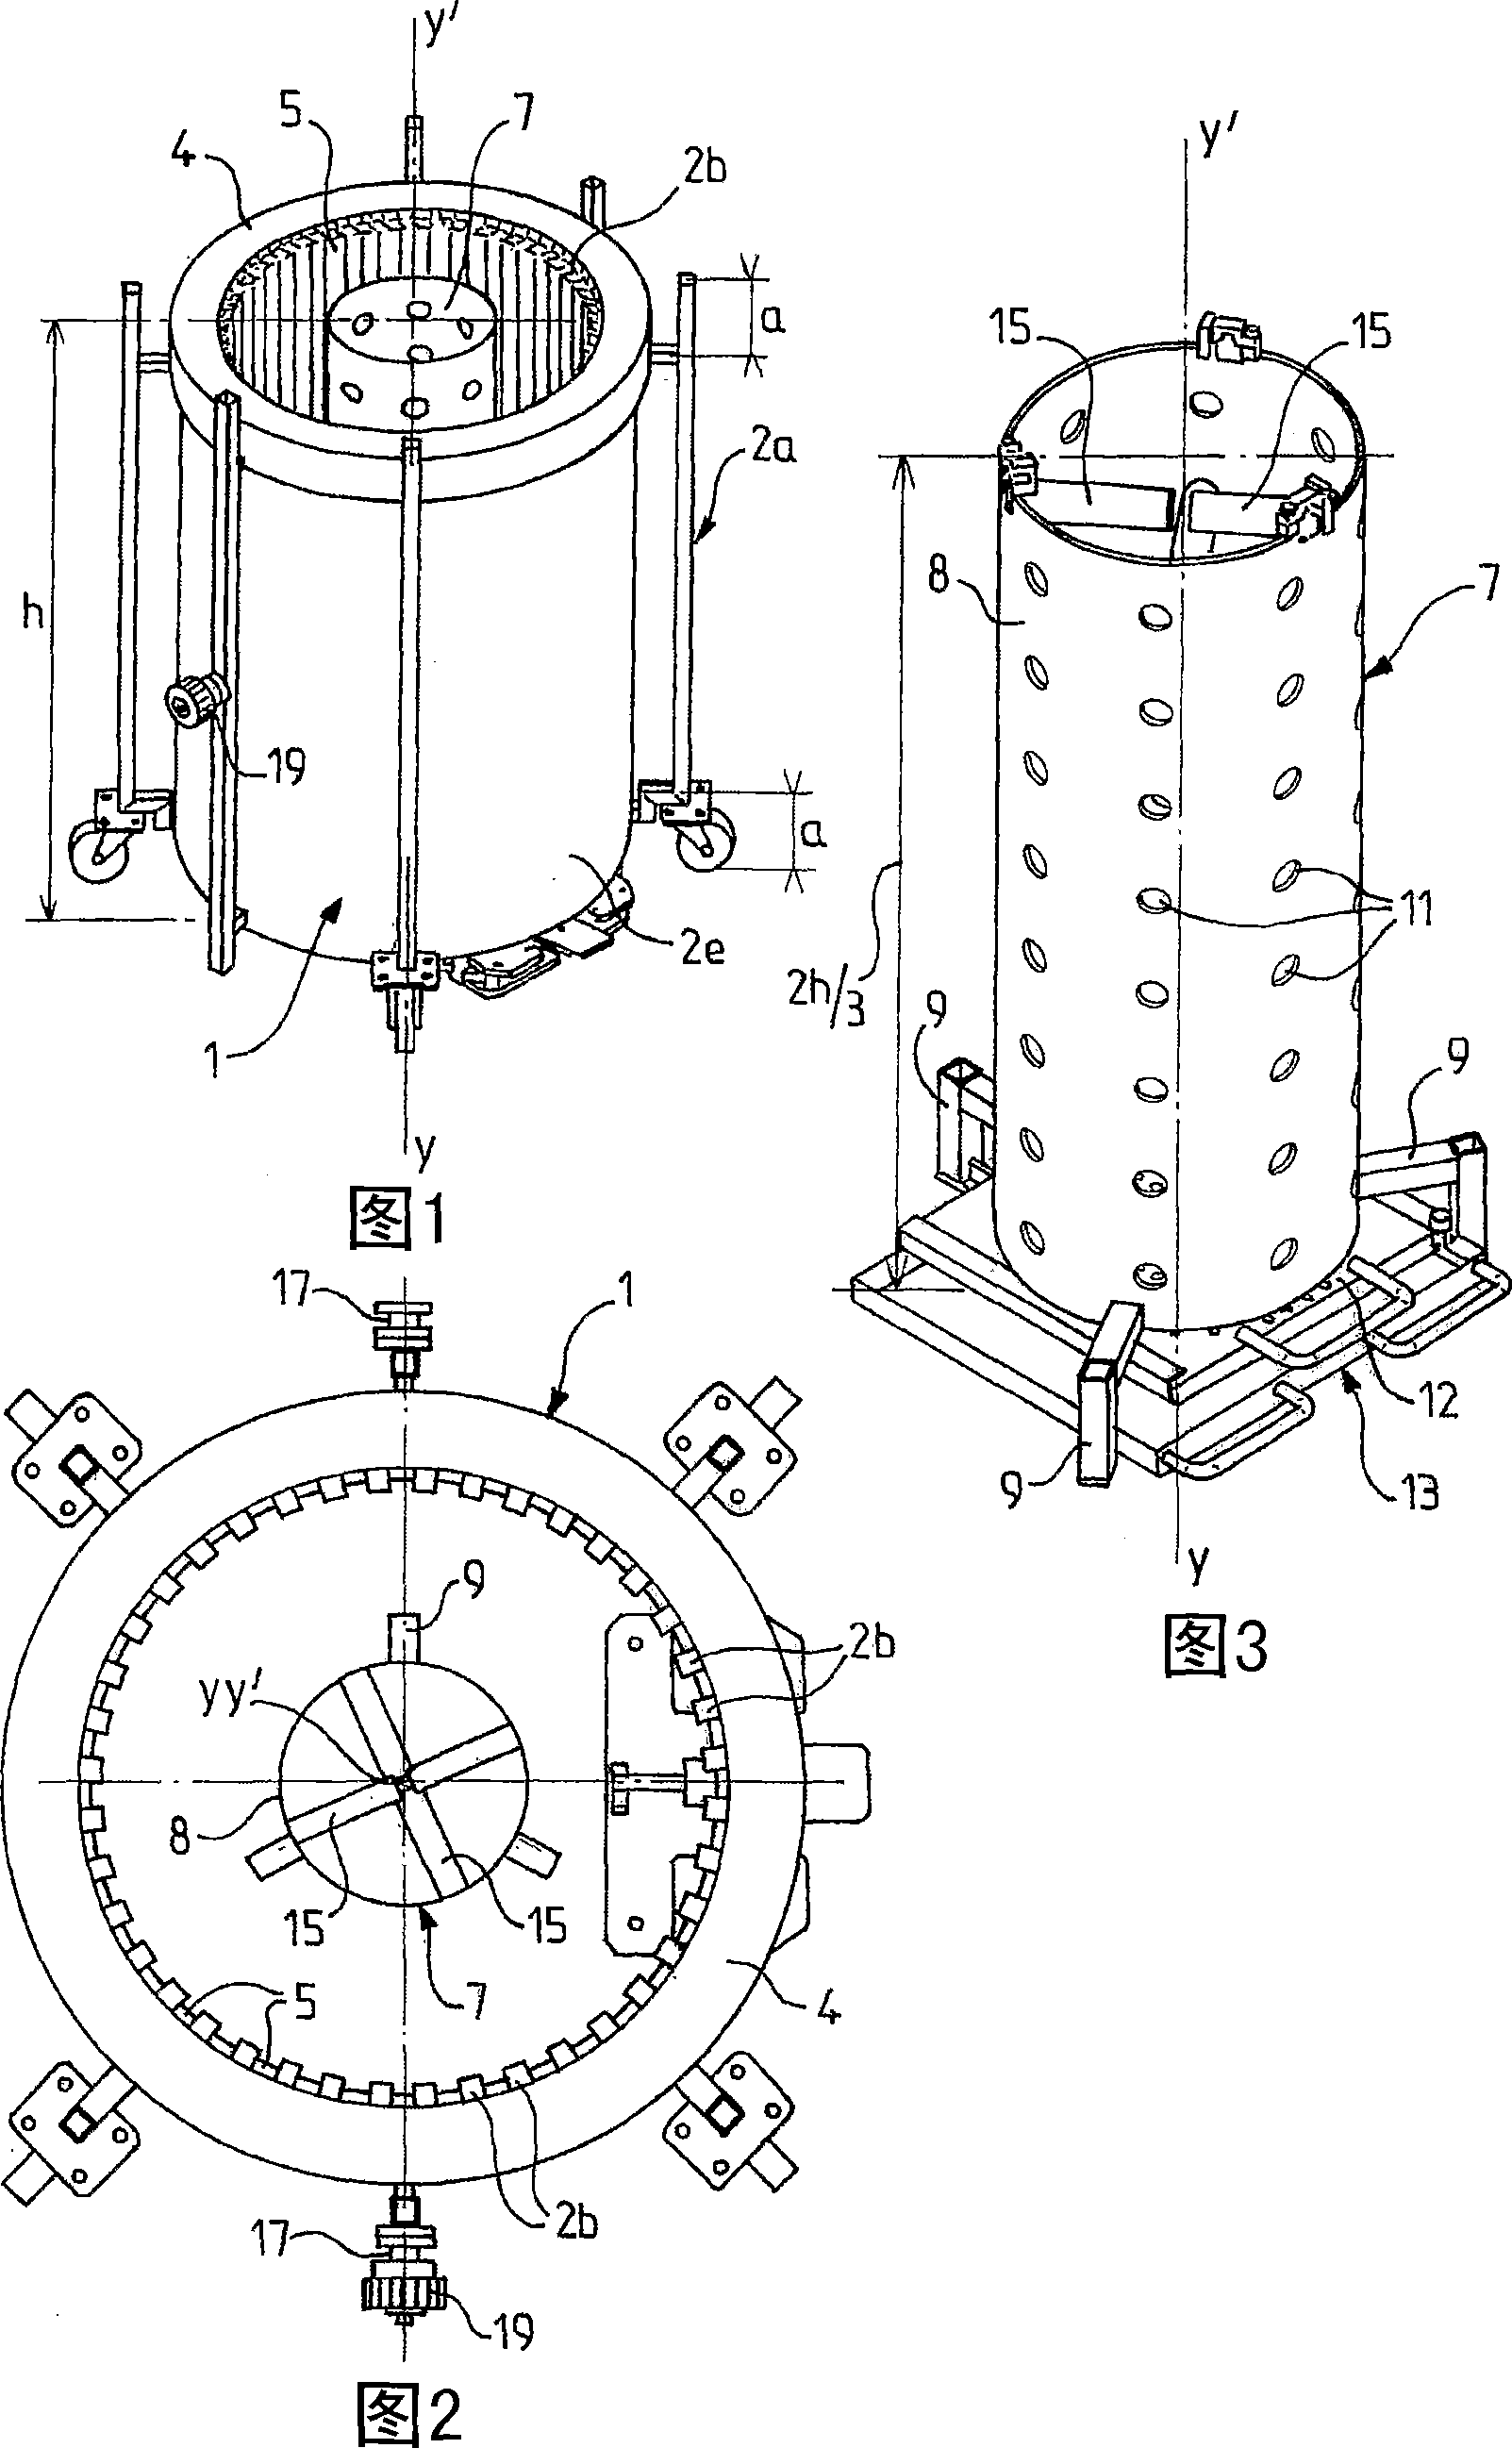 Method and device for heat treatment of wooden staves designed to form aromatic inserts